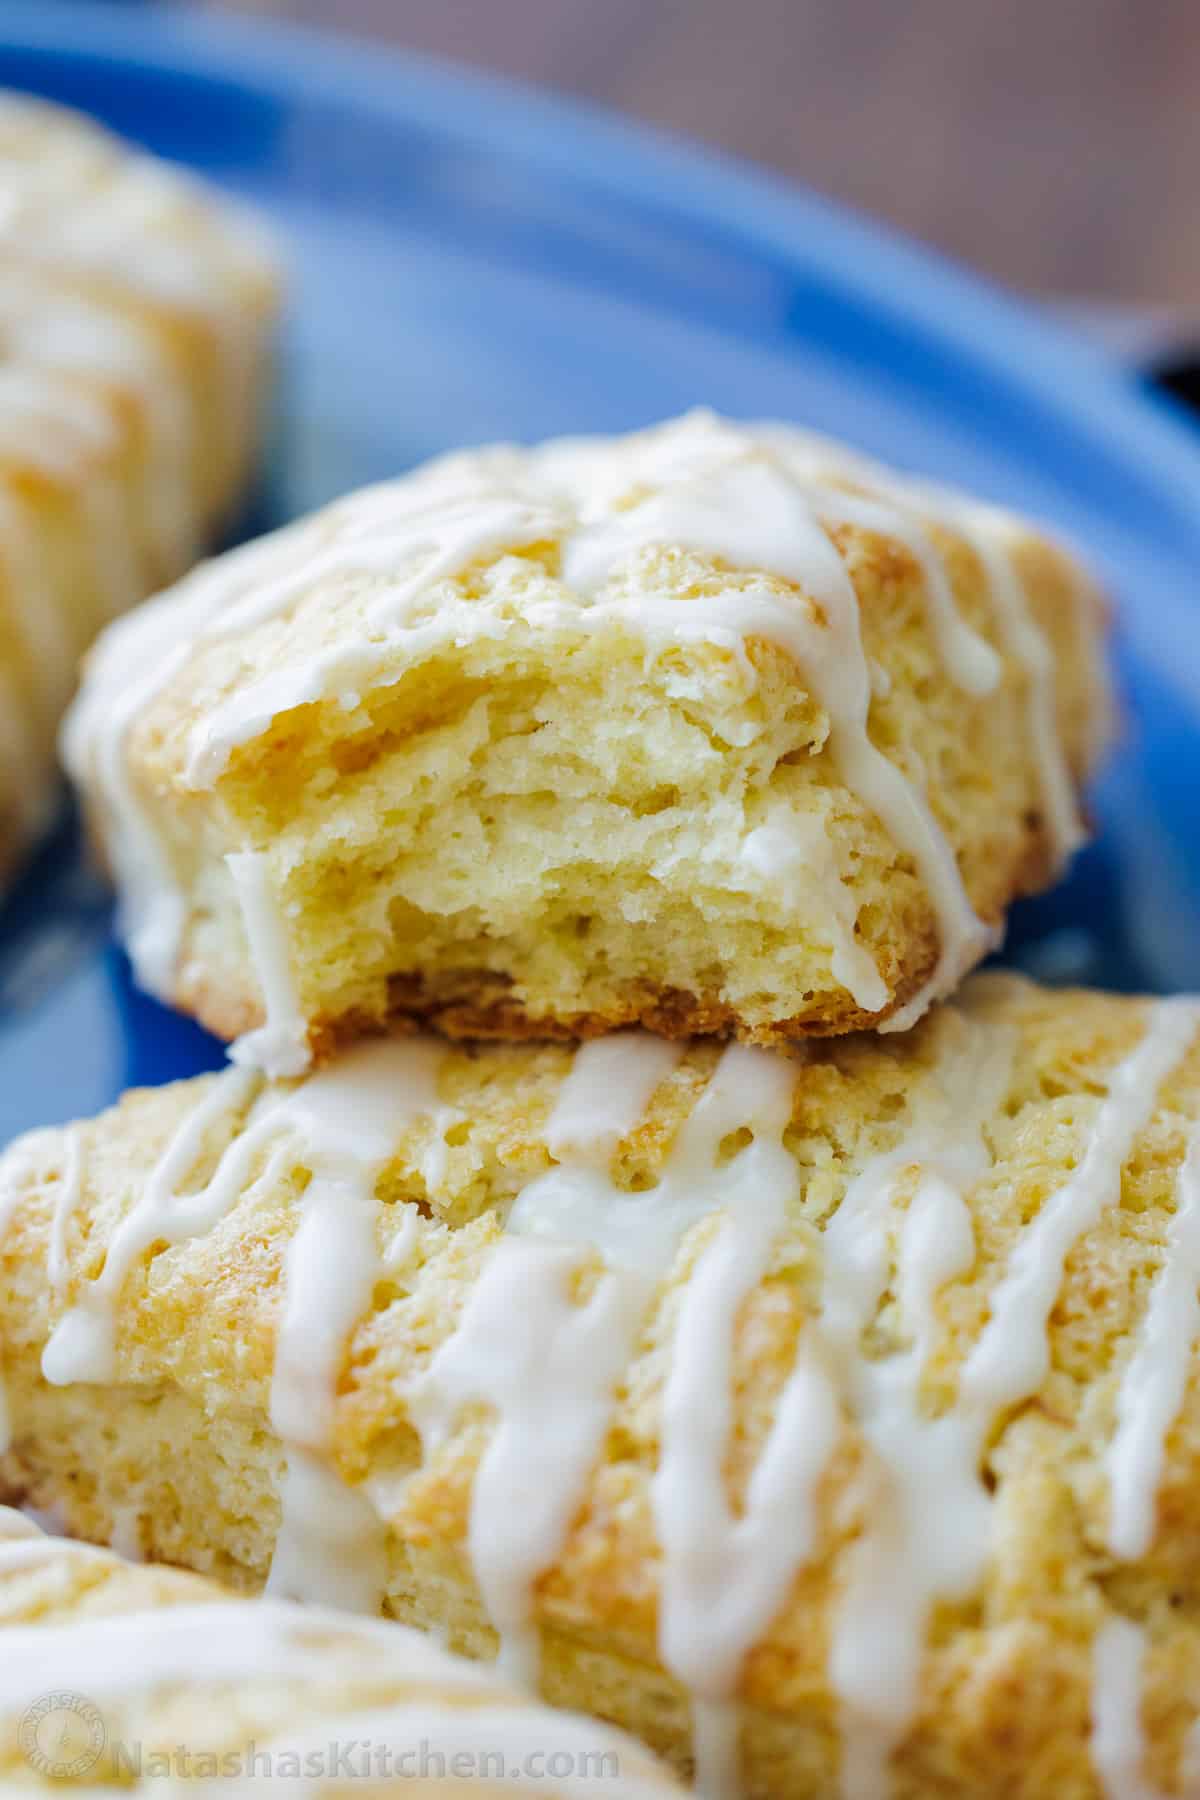 Flaky, soft textured scones on a plate, drizzled with vanilla glaze.